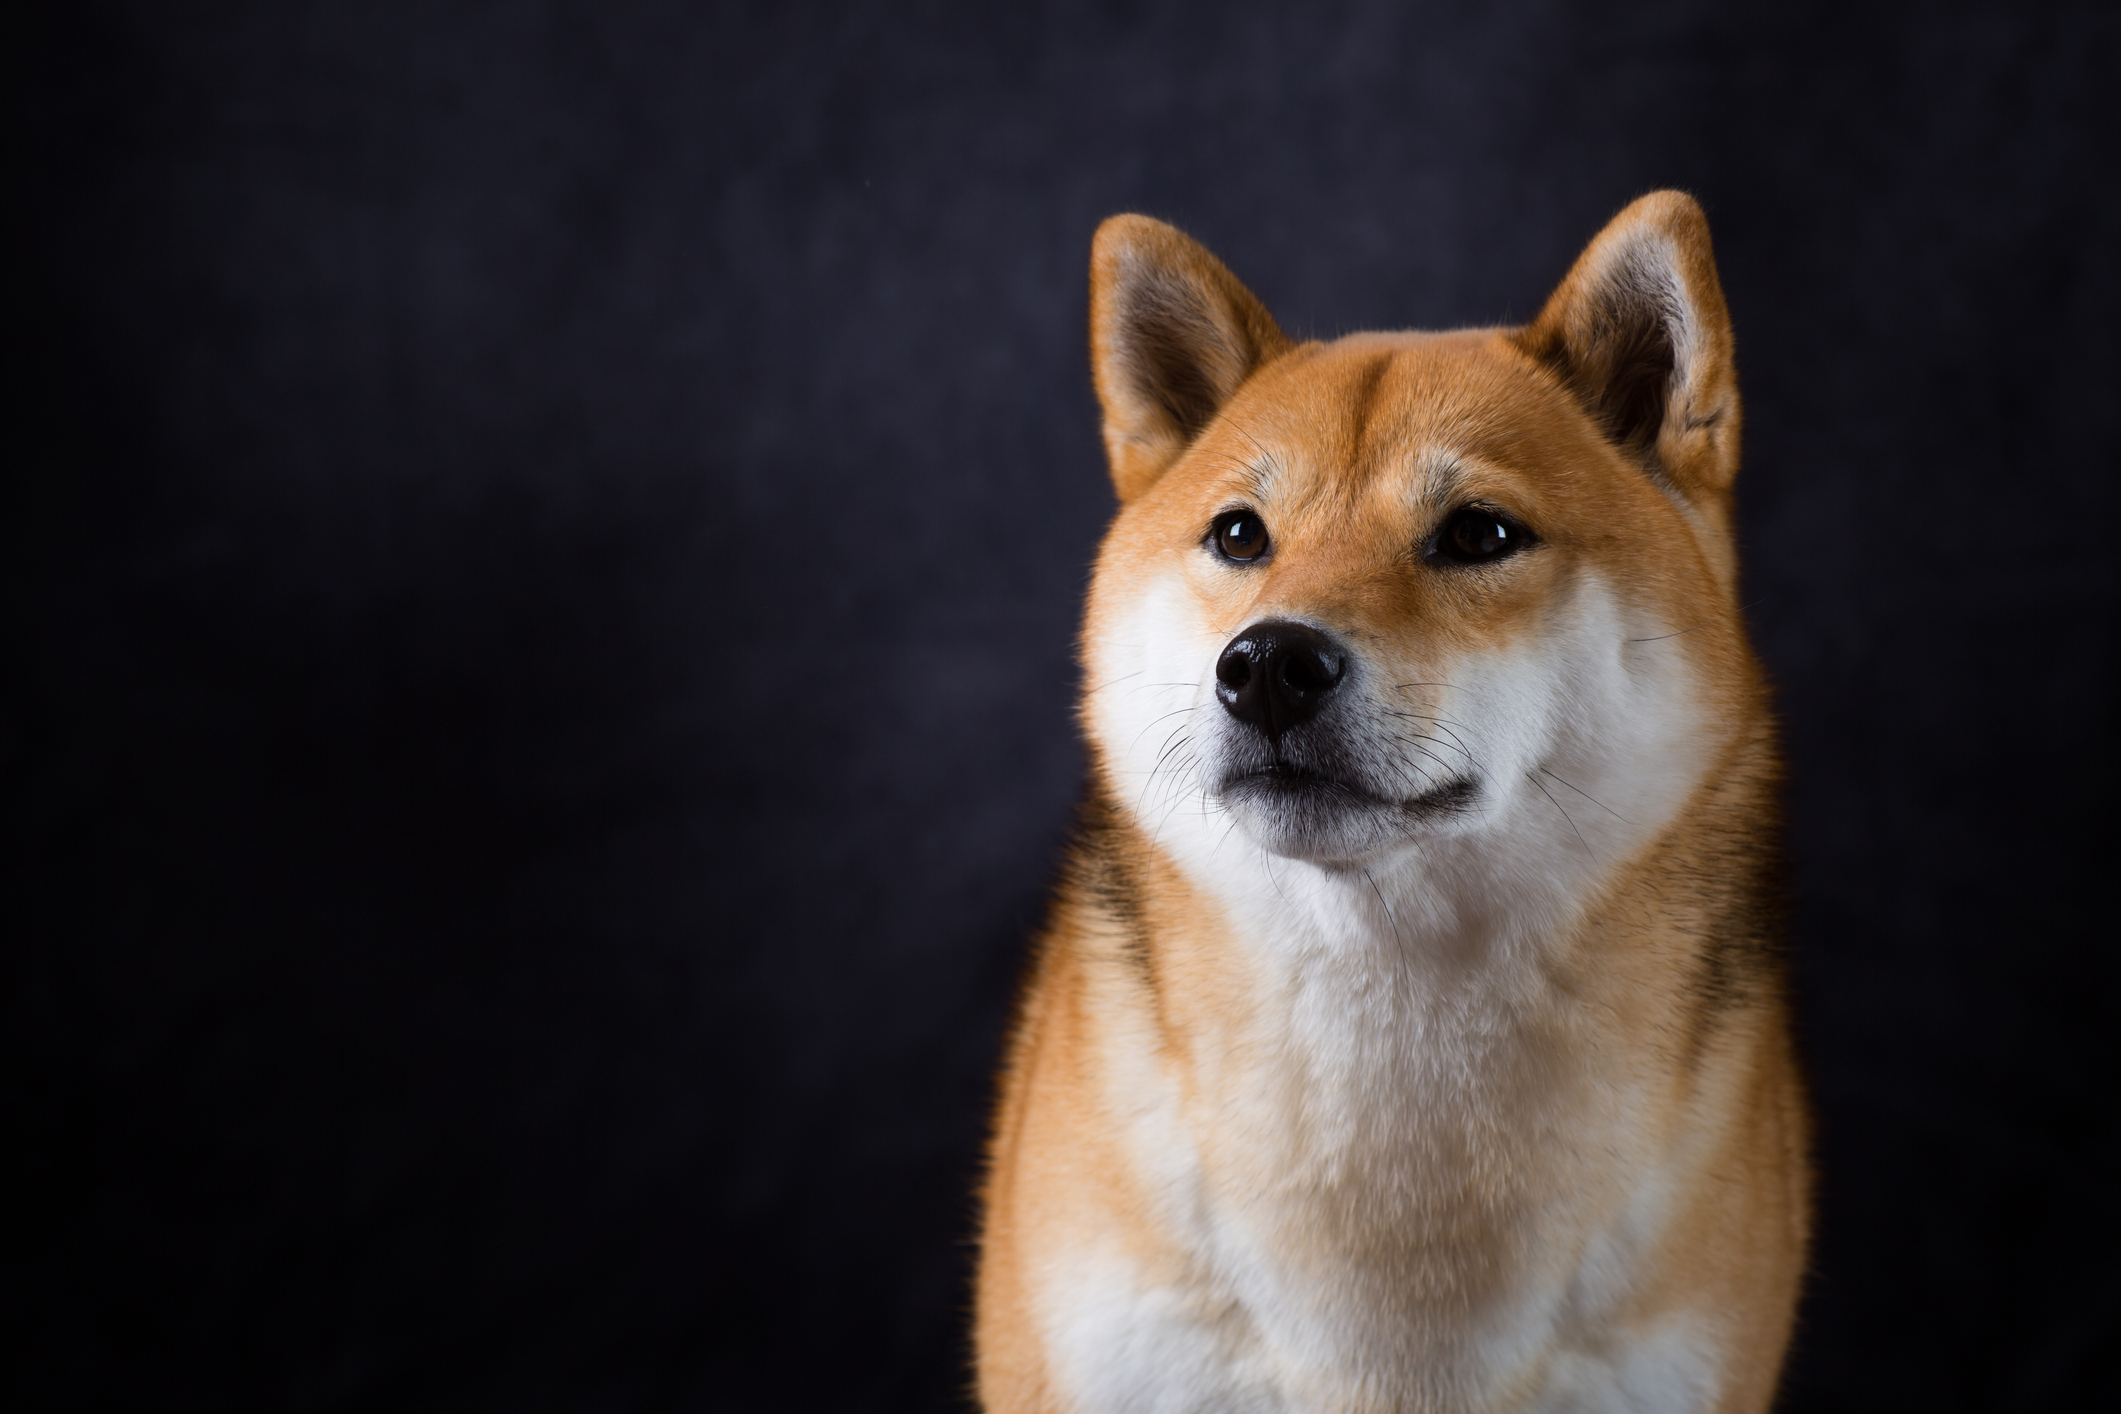 How To Buy Shiba Inu Coin On Coinbase Reddit